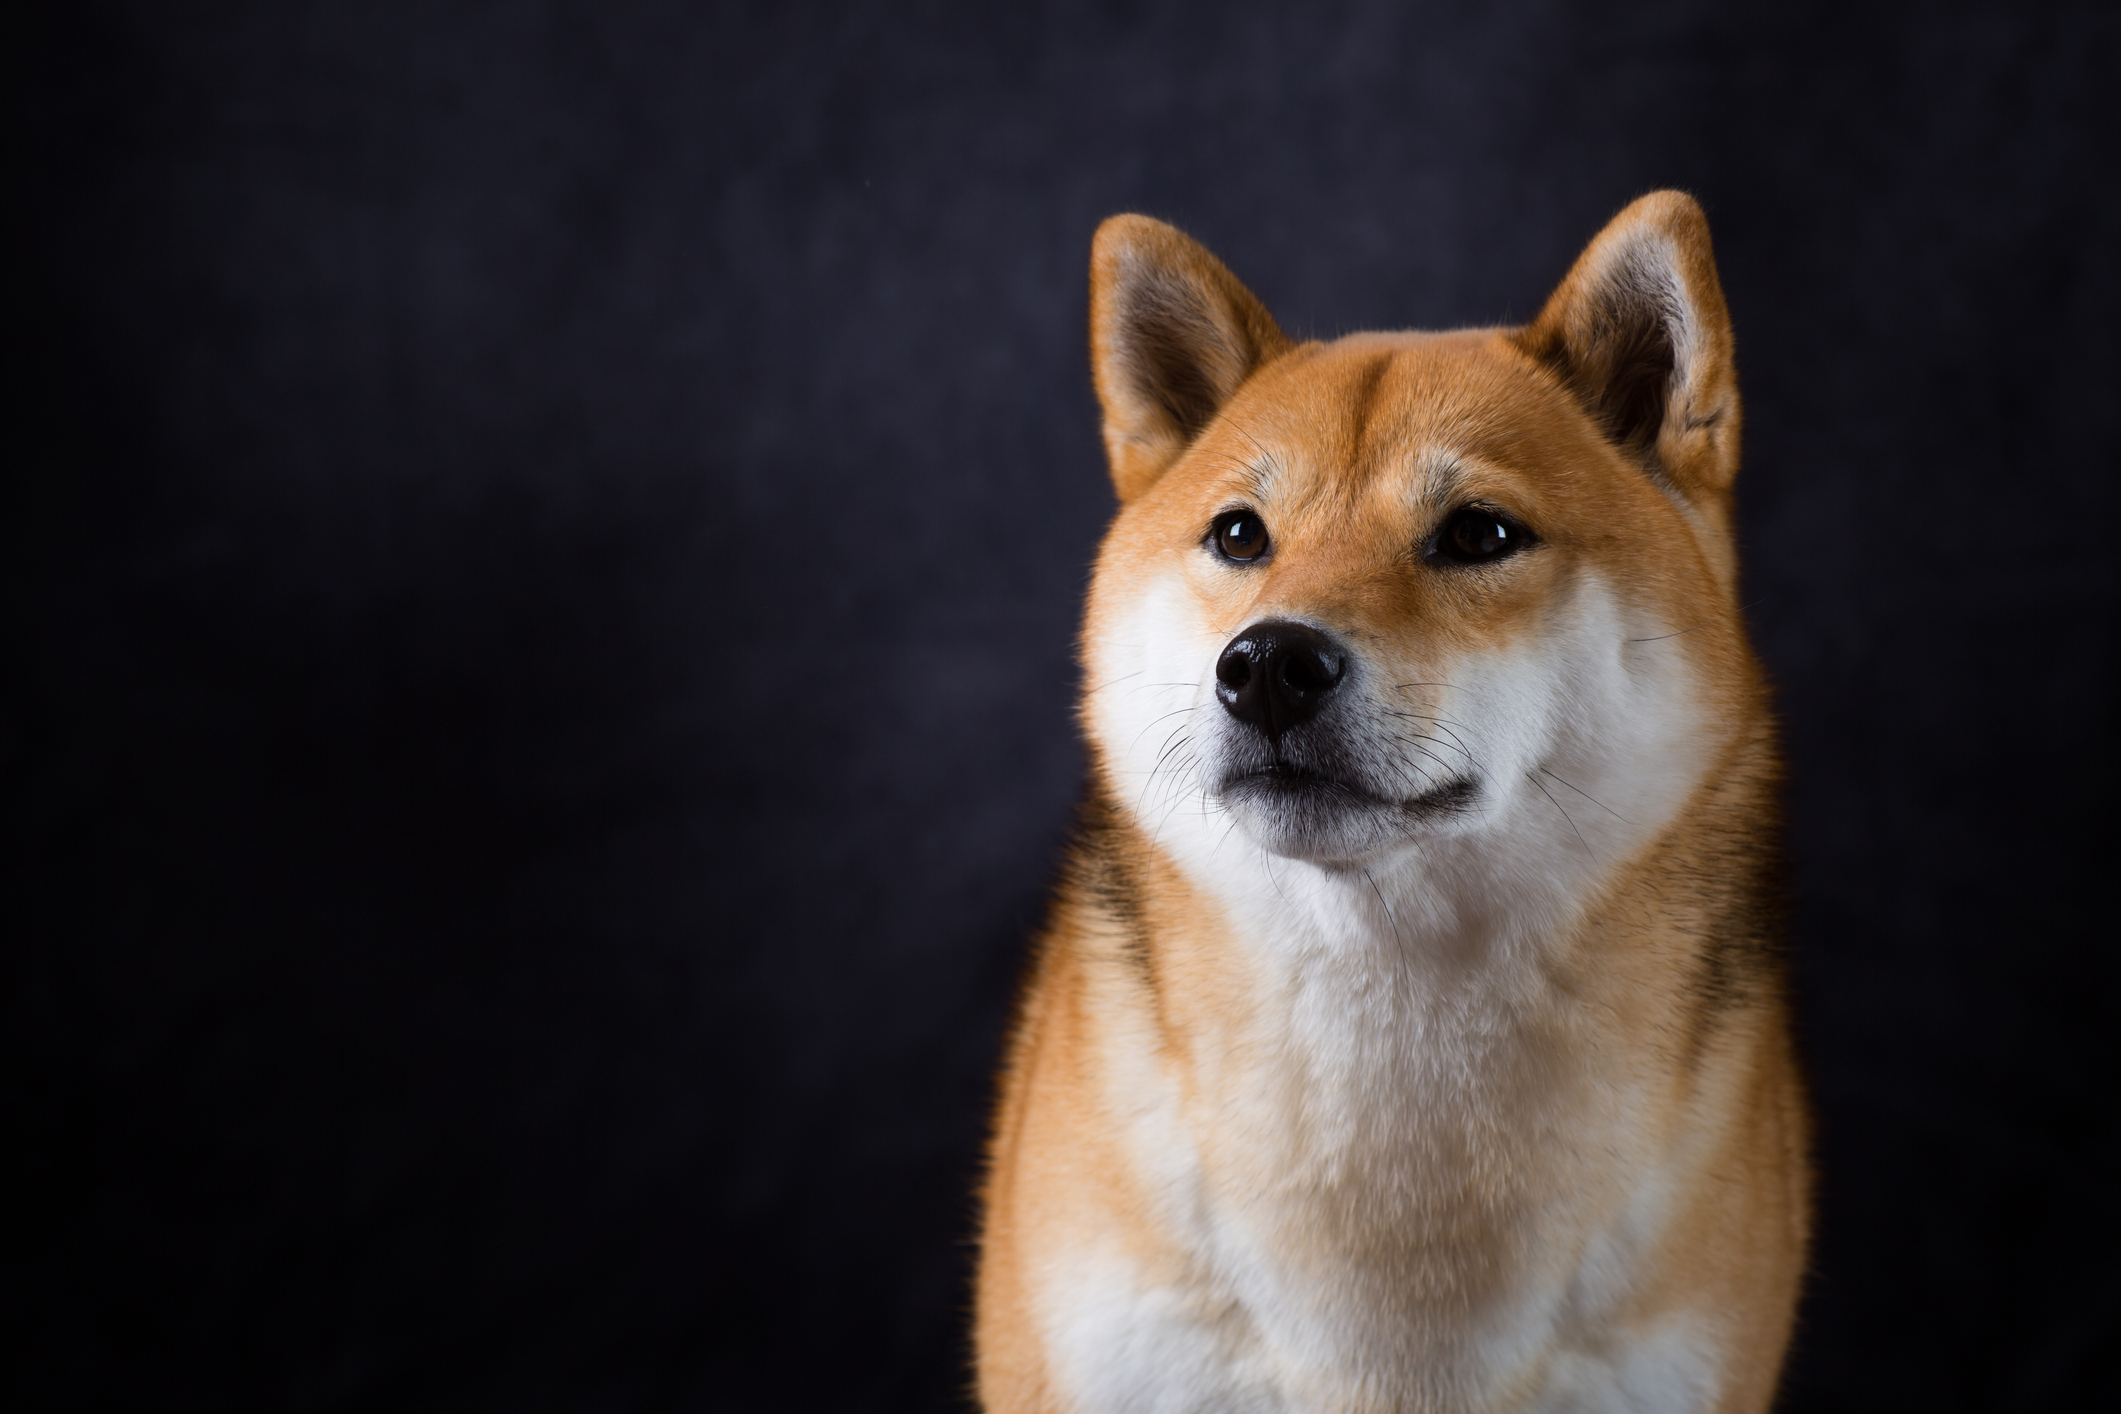 How To Buy Shiba Inu Coin On Coinbase Reddit